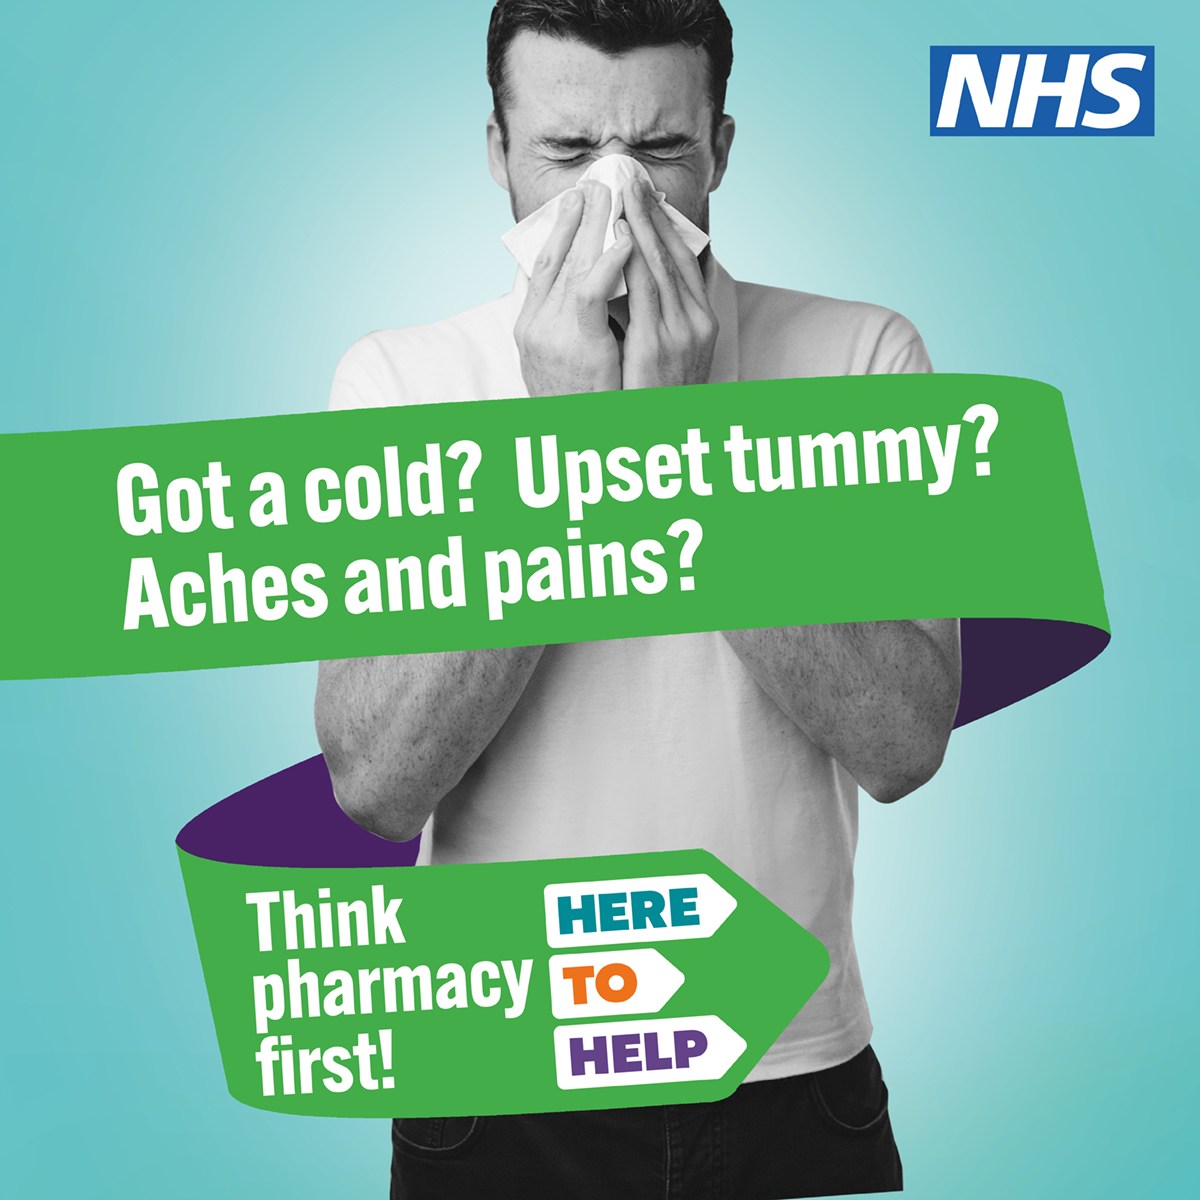 Always think pharmacy first! Pharmacists are part of your expert NHS healthcare team and can help give advice and treatment for a range of common illnesses. For more information: nhs.uk/service-search…